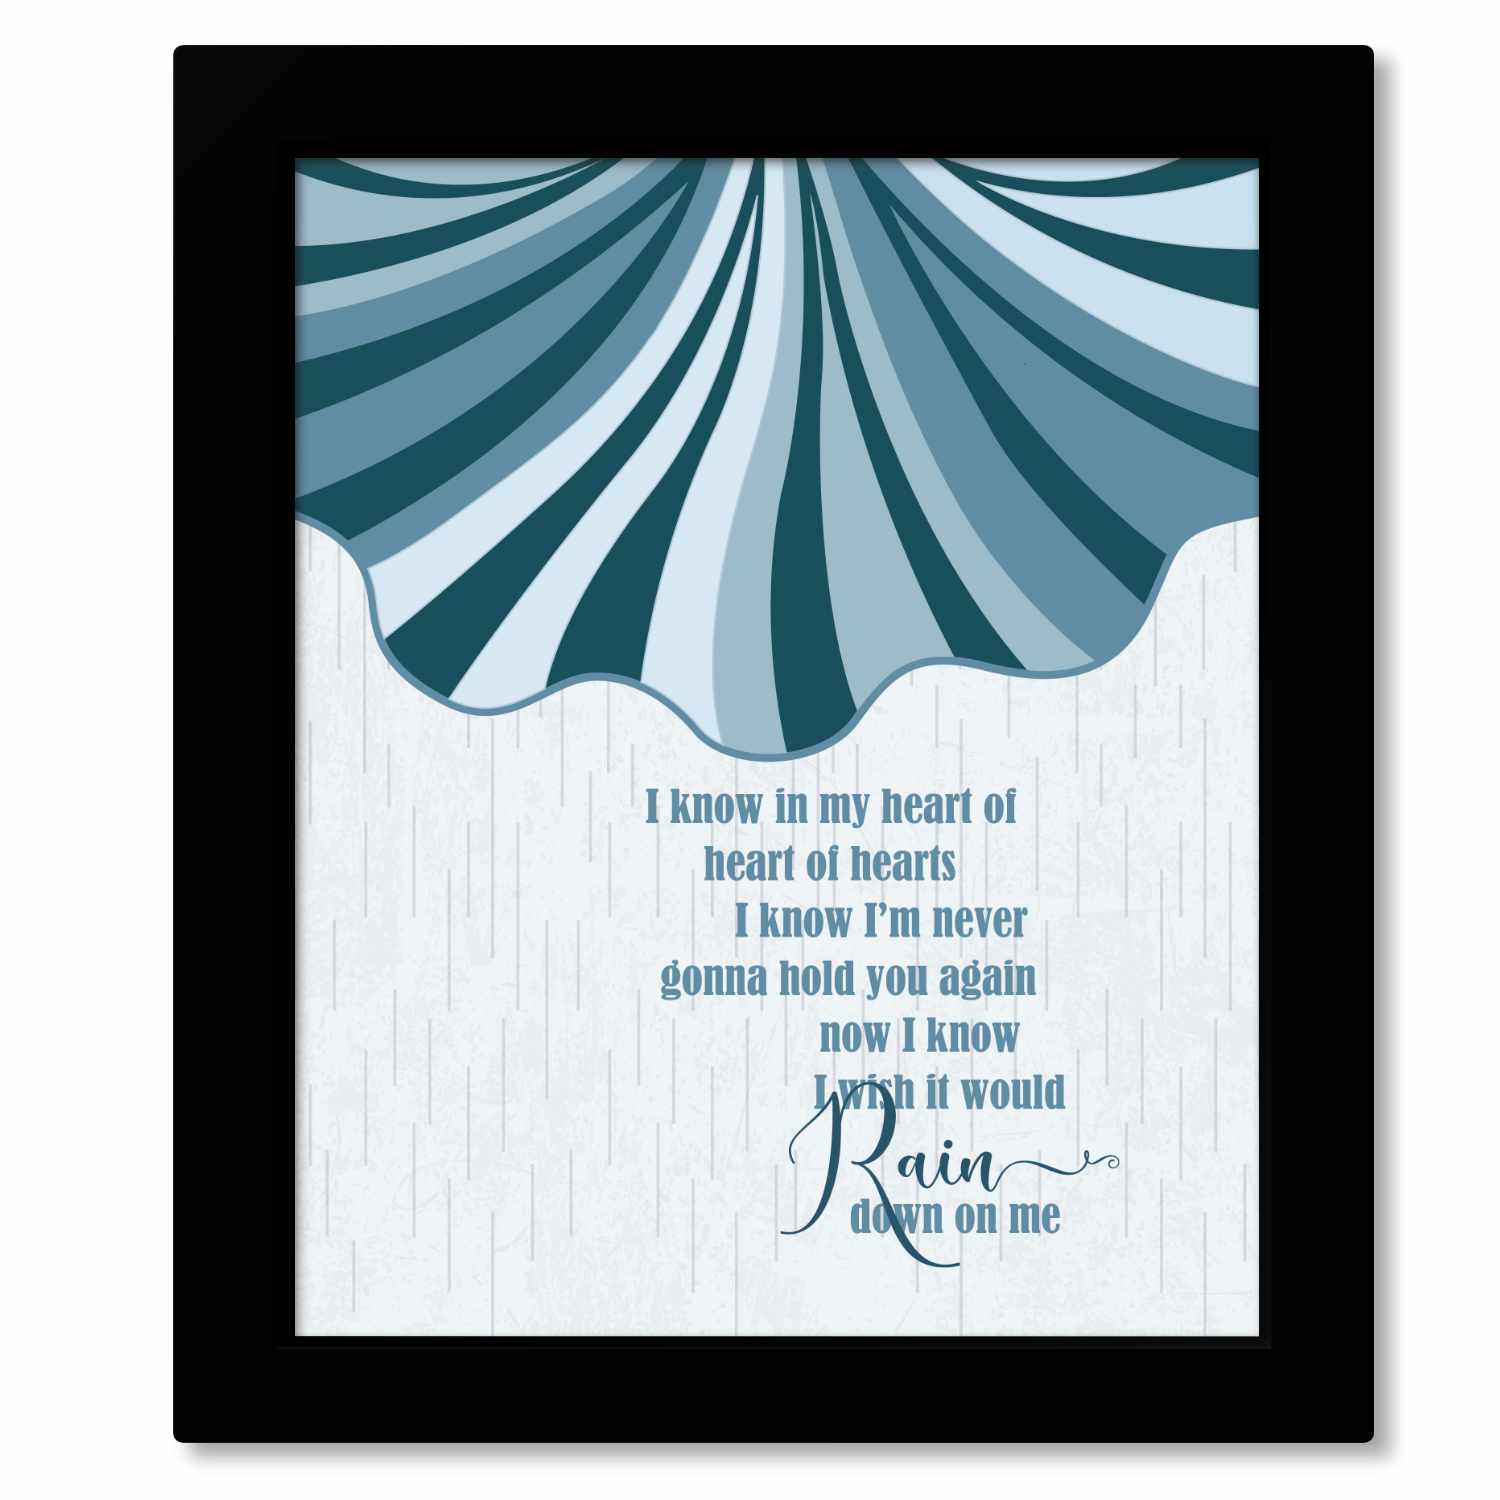 I Wish it Would Rain Down by Phil Collins - Song Lyric Poster Song Lyrics Art Song Lyrics Art 8x10 Framed Print (without mat) 